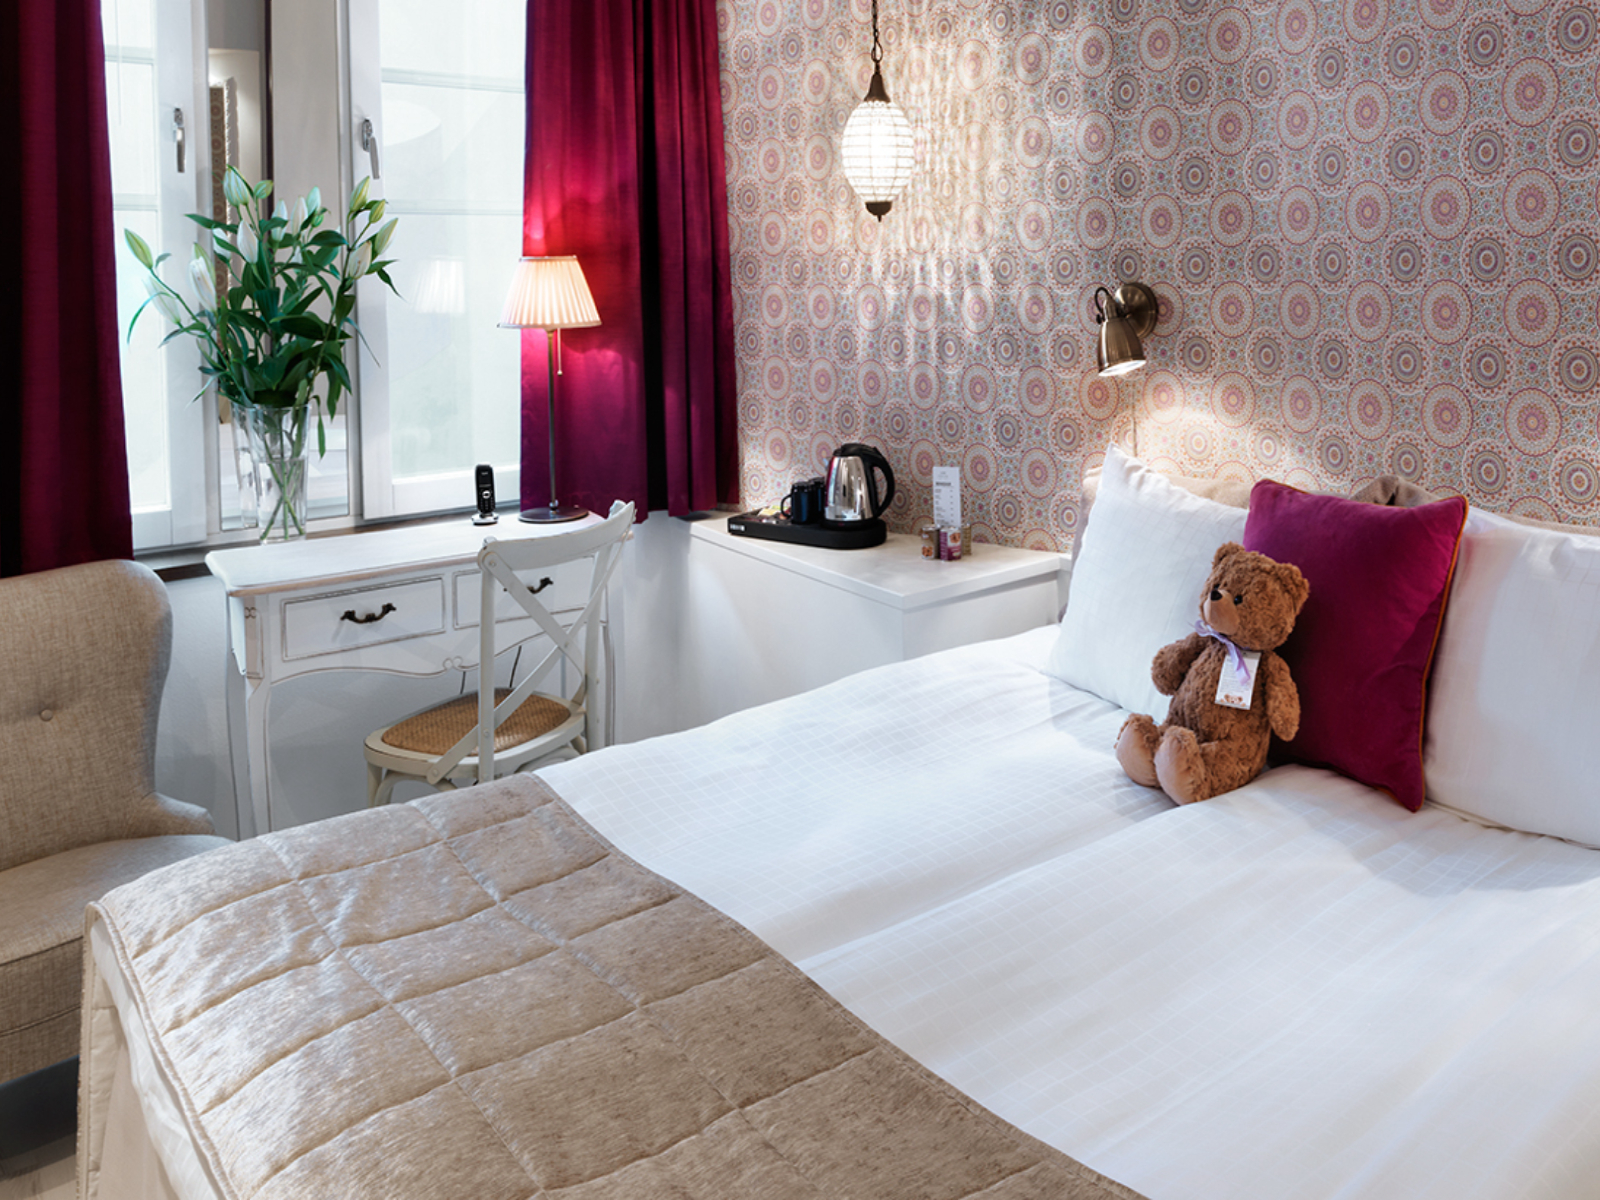 Freys Hotel Stockholm <br/>127.24 ew <br/> <a href='http://vakantieoplossing.nl/outpage/?id=292464b981378d252ef91f6fd2dc276c' target='_blank'>View Details</a>